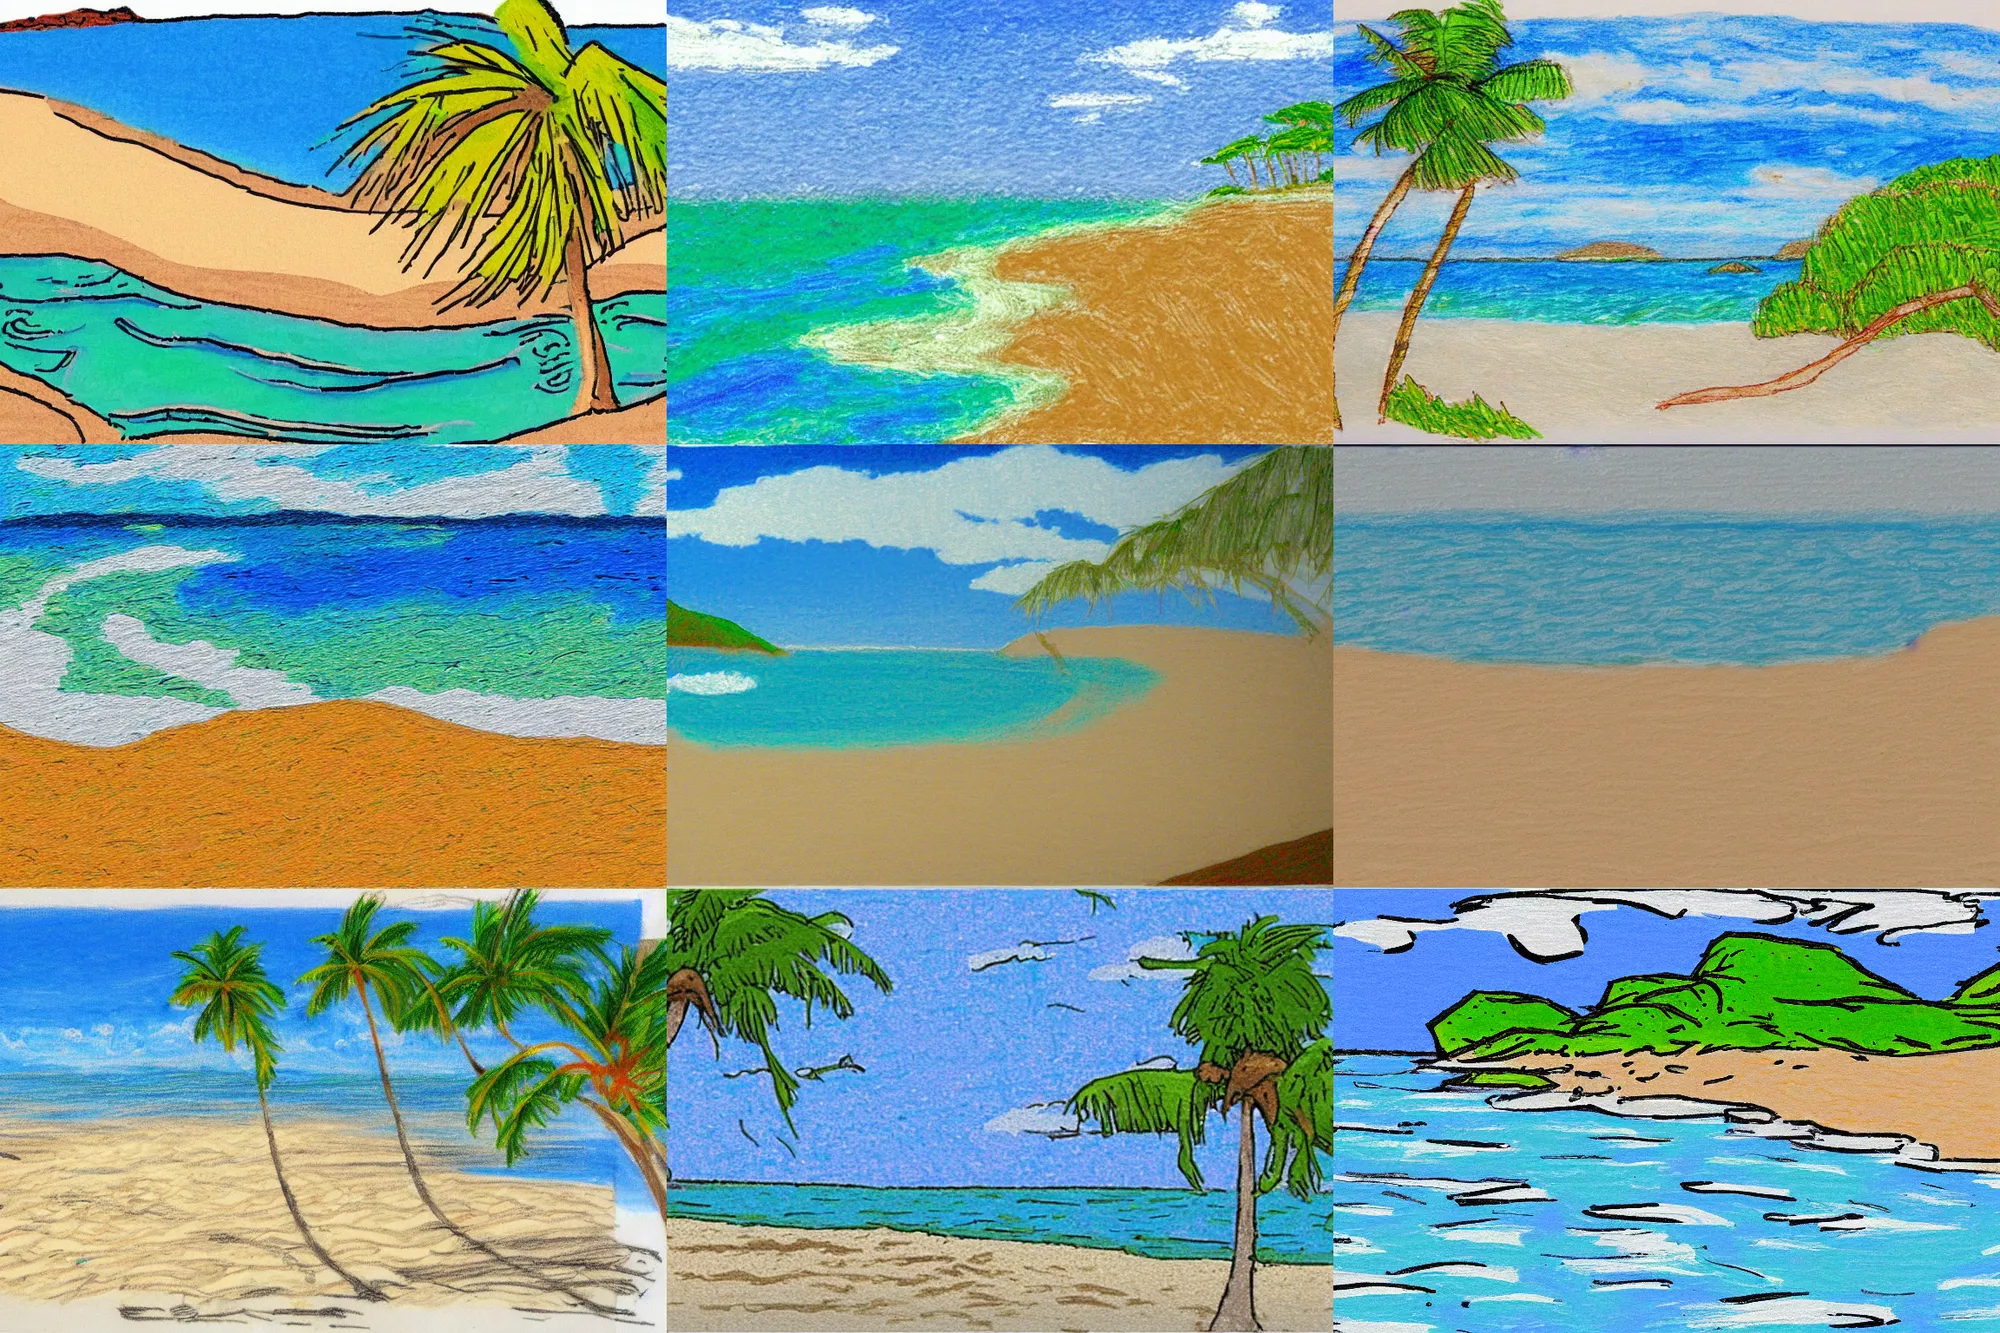 Sea Beach easy scenery drawing ideas. | drawing | Easy and simple scenery  drawing ideas for beginners | By Drawing Book | Have blurred ever since you  came and I can't tell